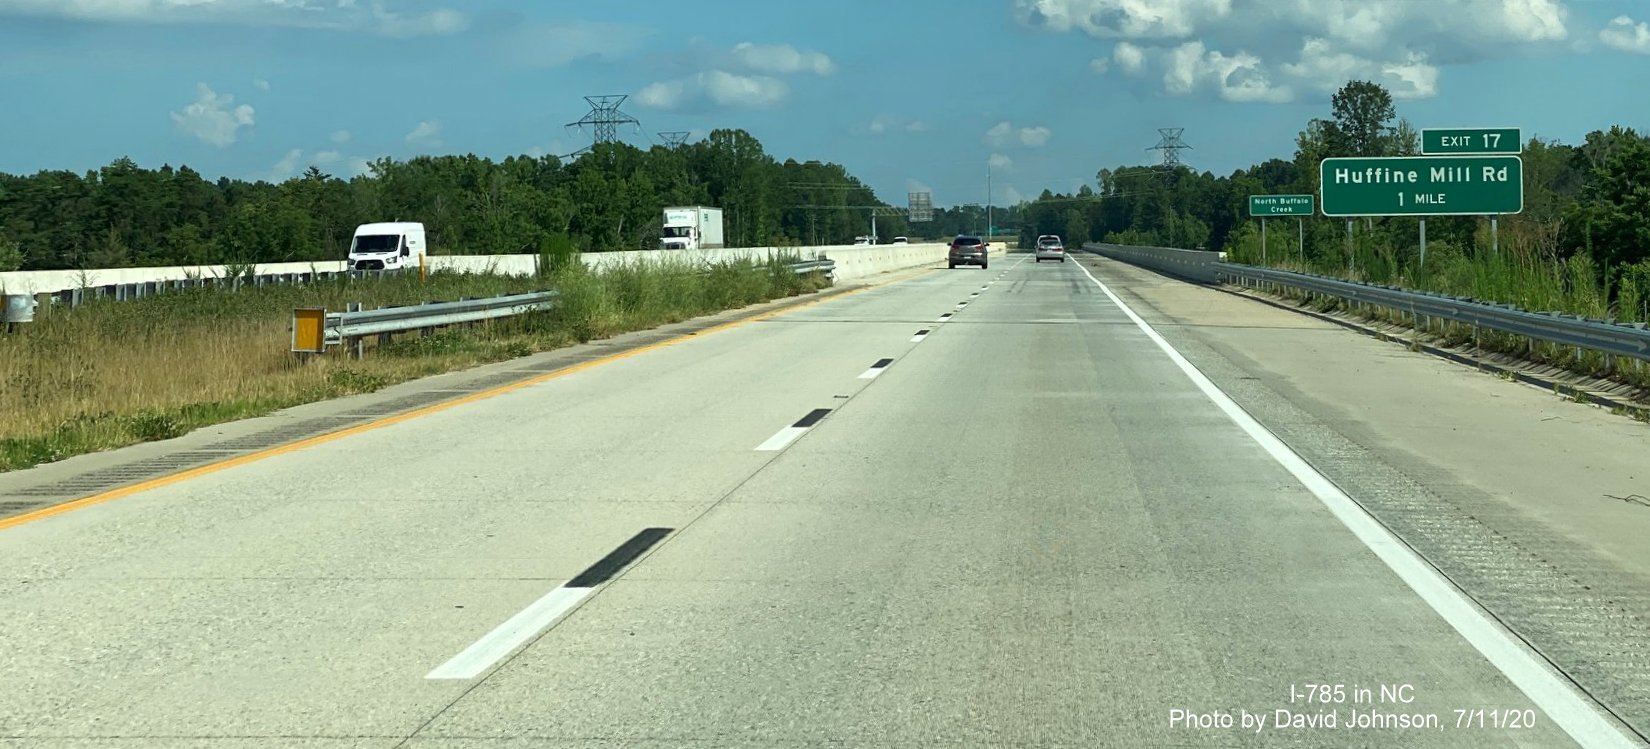 Image of ground mounted 2-miles advance sign for Huffine Mill Road on I-785 South/Greensboro Urban Loop, by David Johnson July 2020